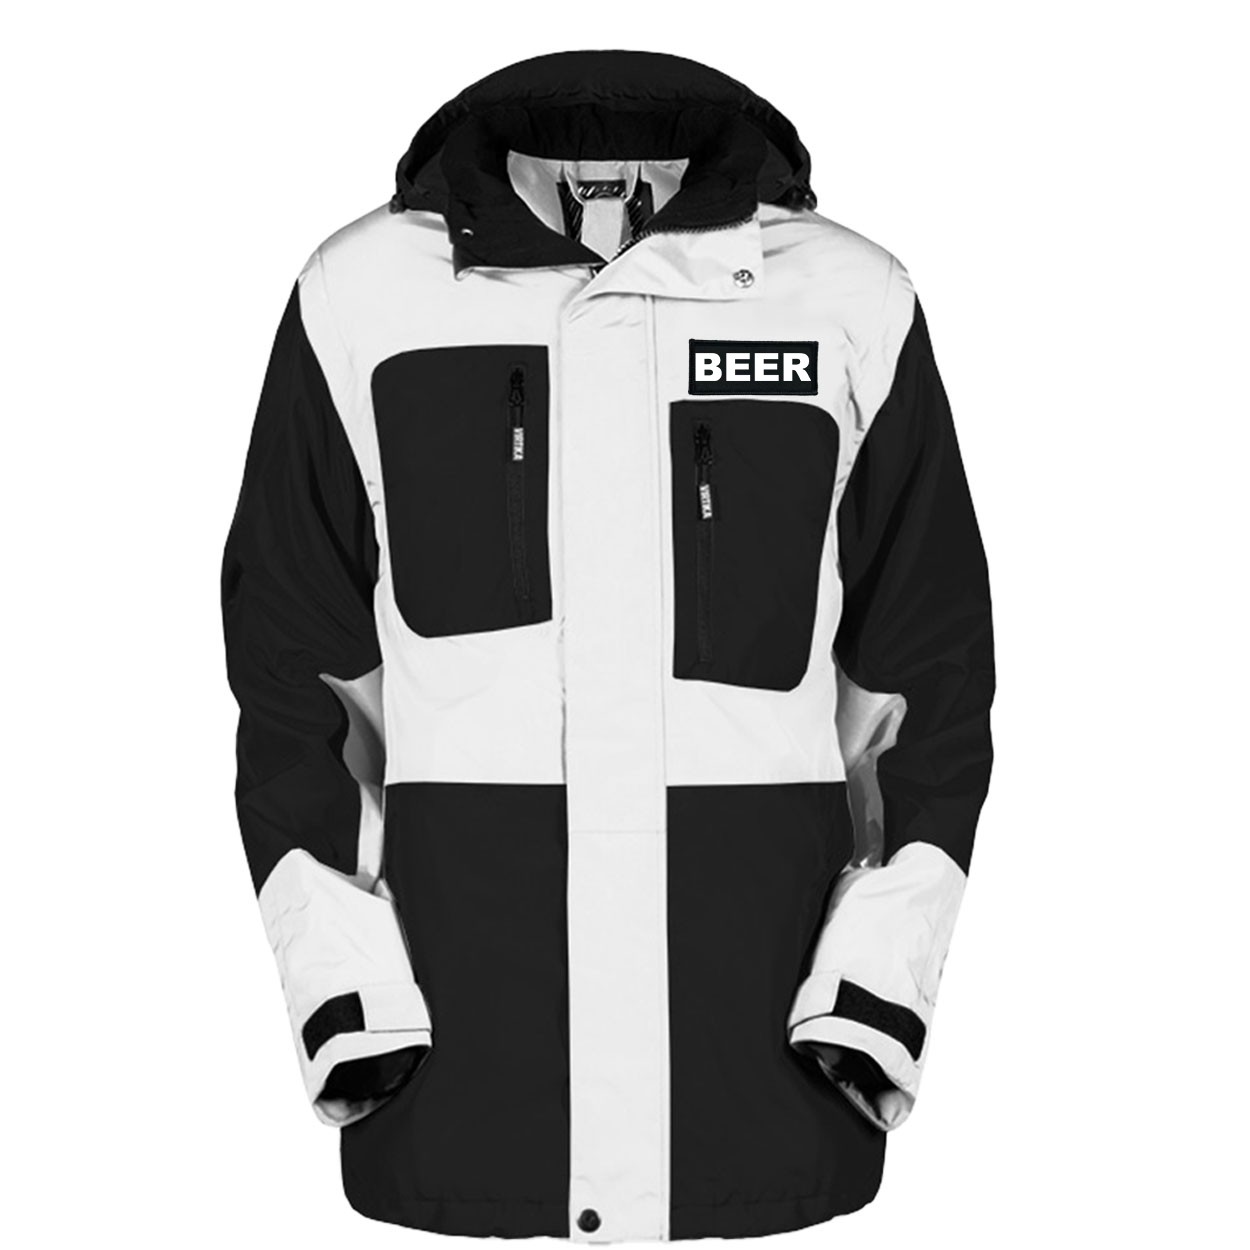 Beer Brand Logo Classic Woven Patch Pro Snowboard Jacket (Black/White)